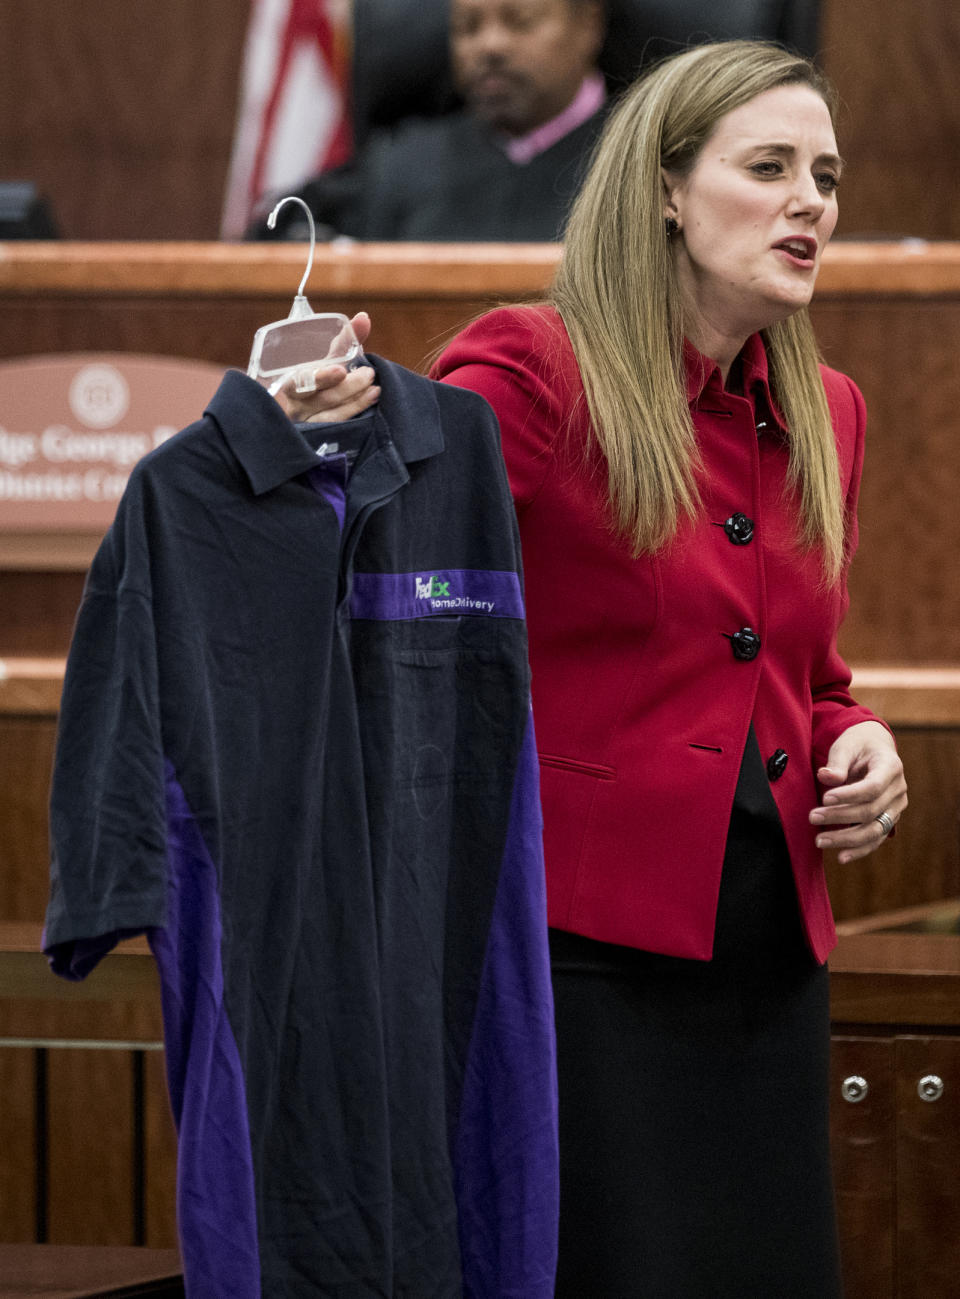 Prosecutor Samantha Knecht holds up a FedEx shirt, which was entered as evidence earlier in the trial, during closing arguments in Ronald Haskell's capital murder trial, Wednesday, Sept. 25, 2019, in Houston. Haskell is on trial for the 2014 shooting of six members of his ex-wife's family in suburban Houston. (Brett Coomer/Houston Chronicle via AP)